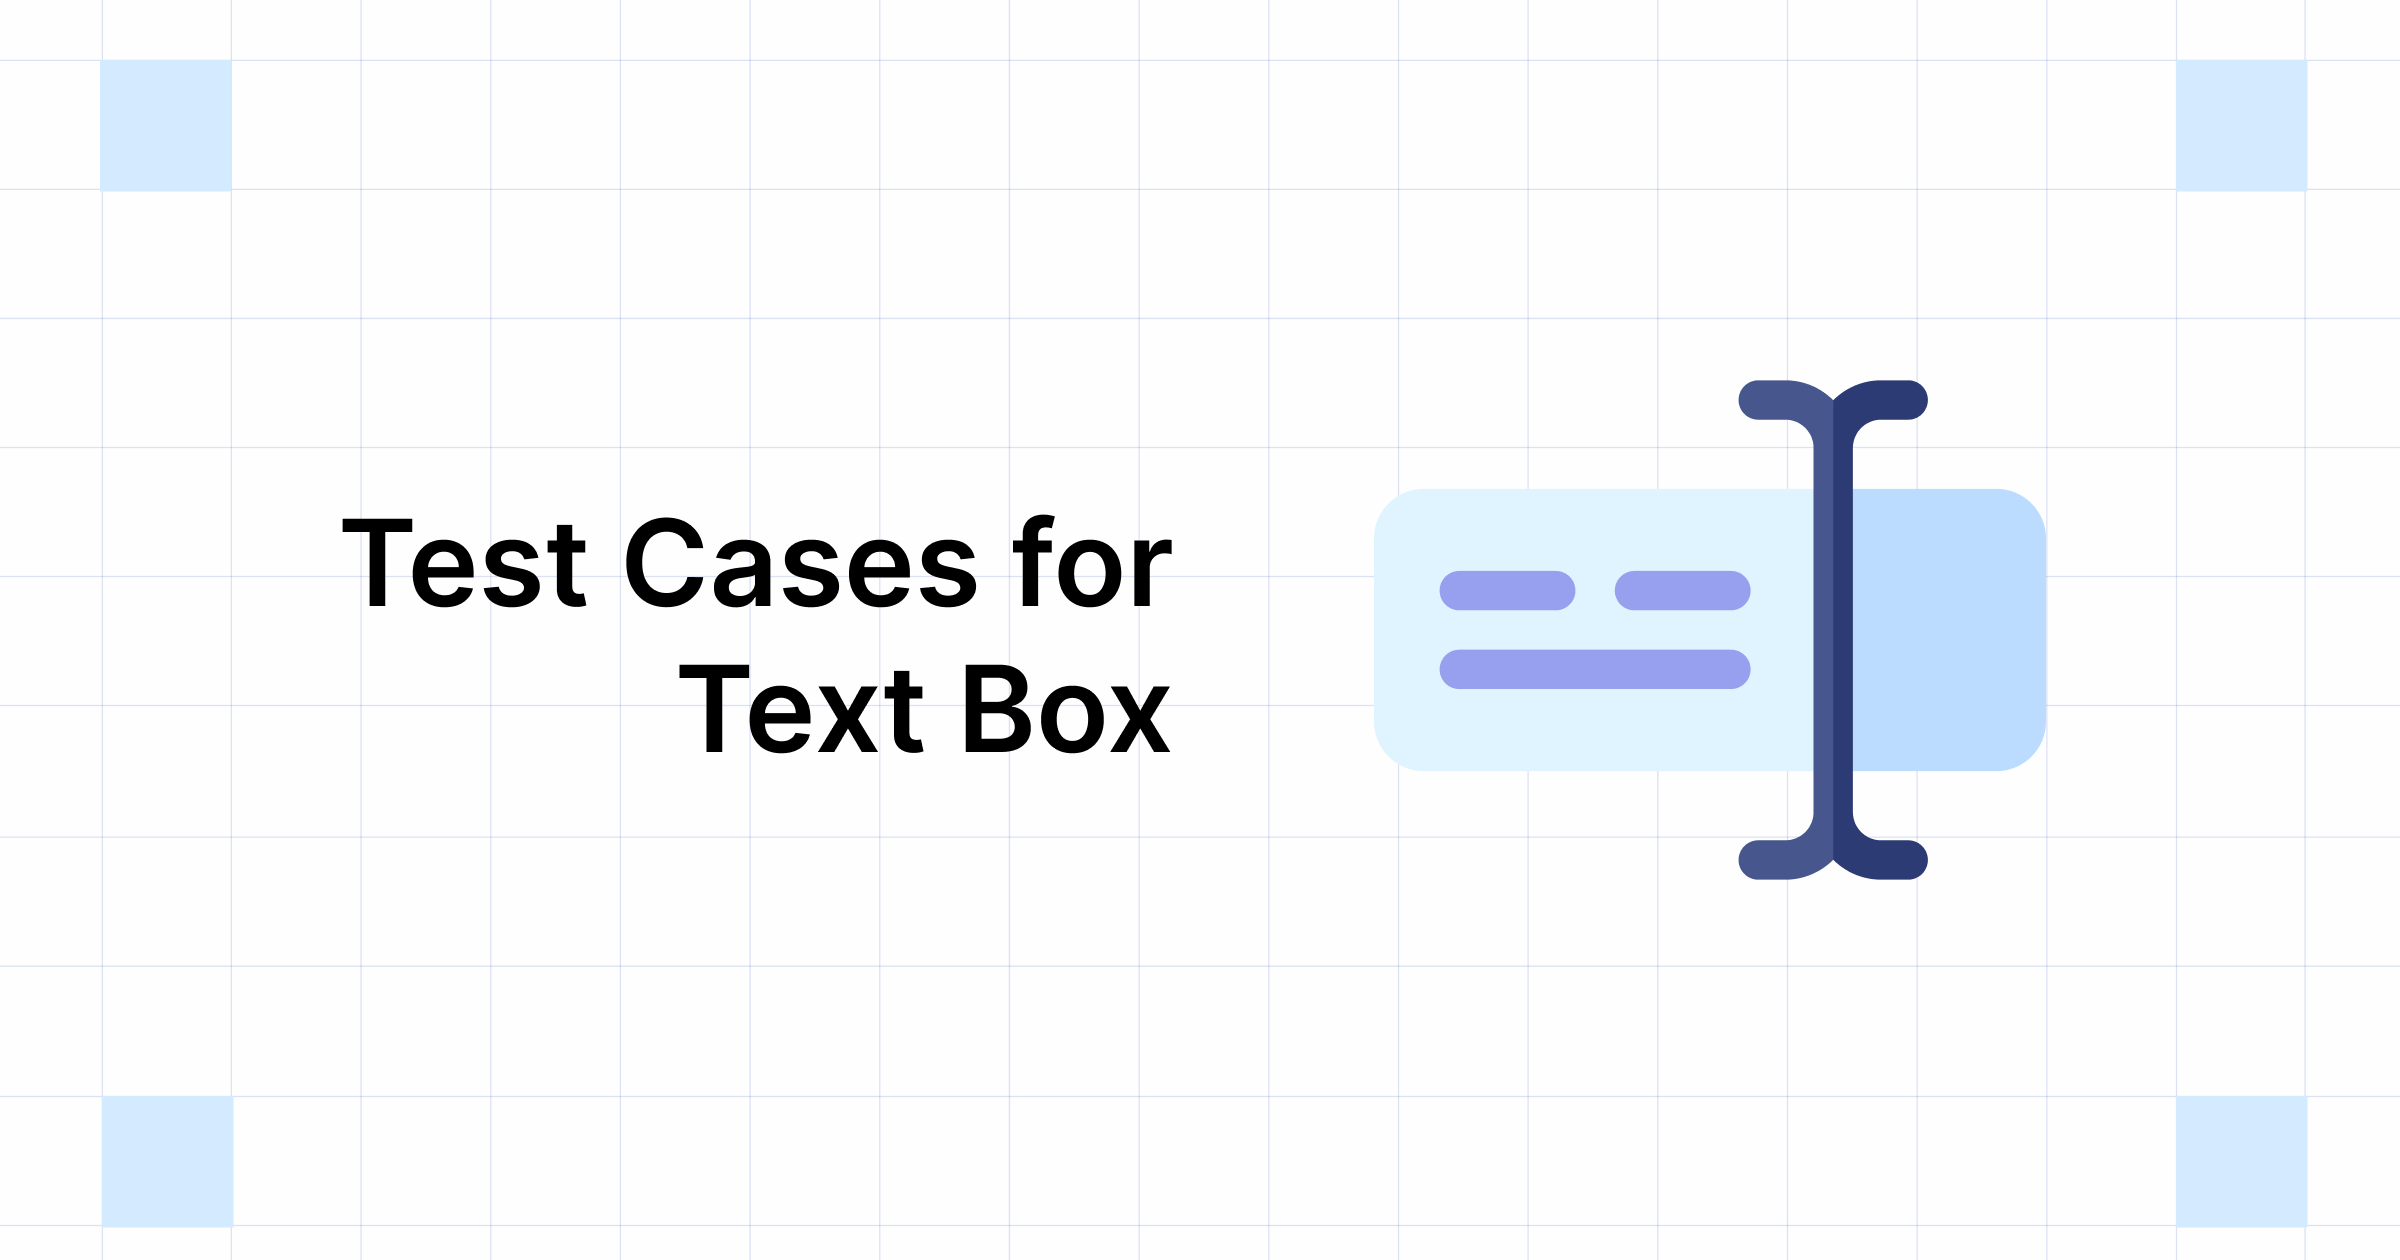 How Do You Write Test Cases for a Text Box